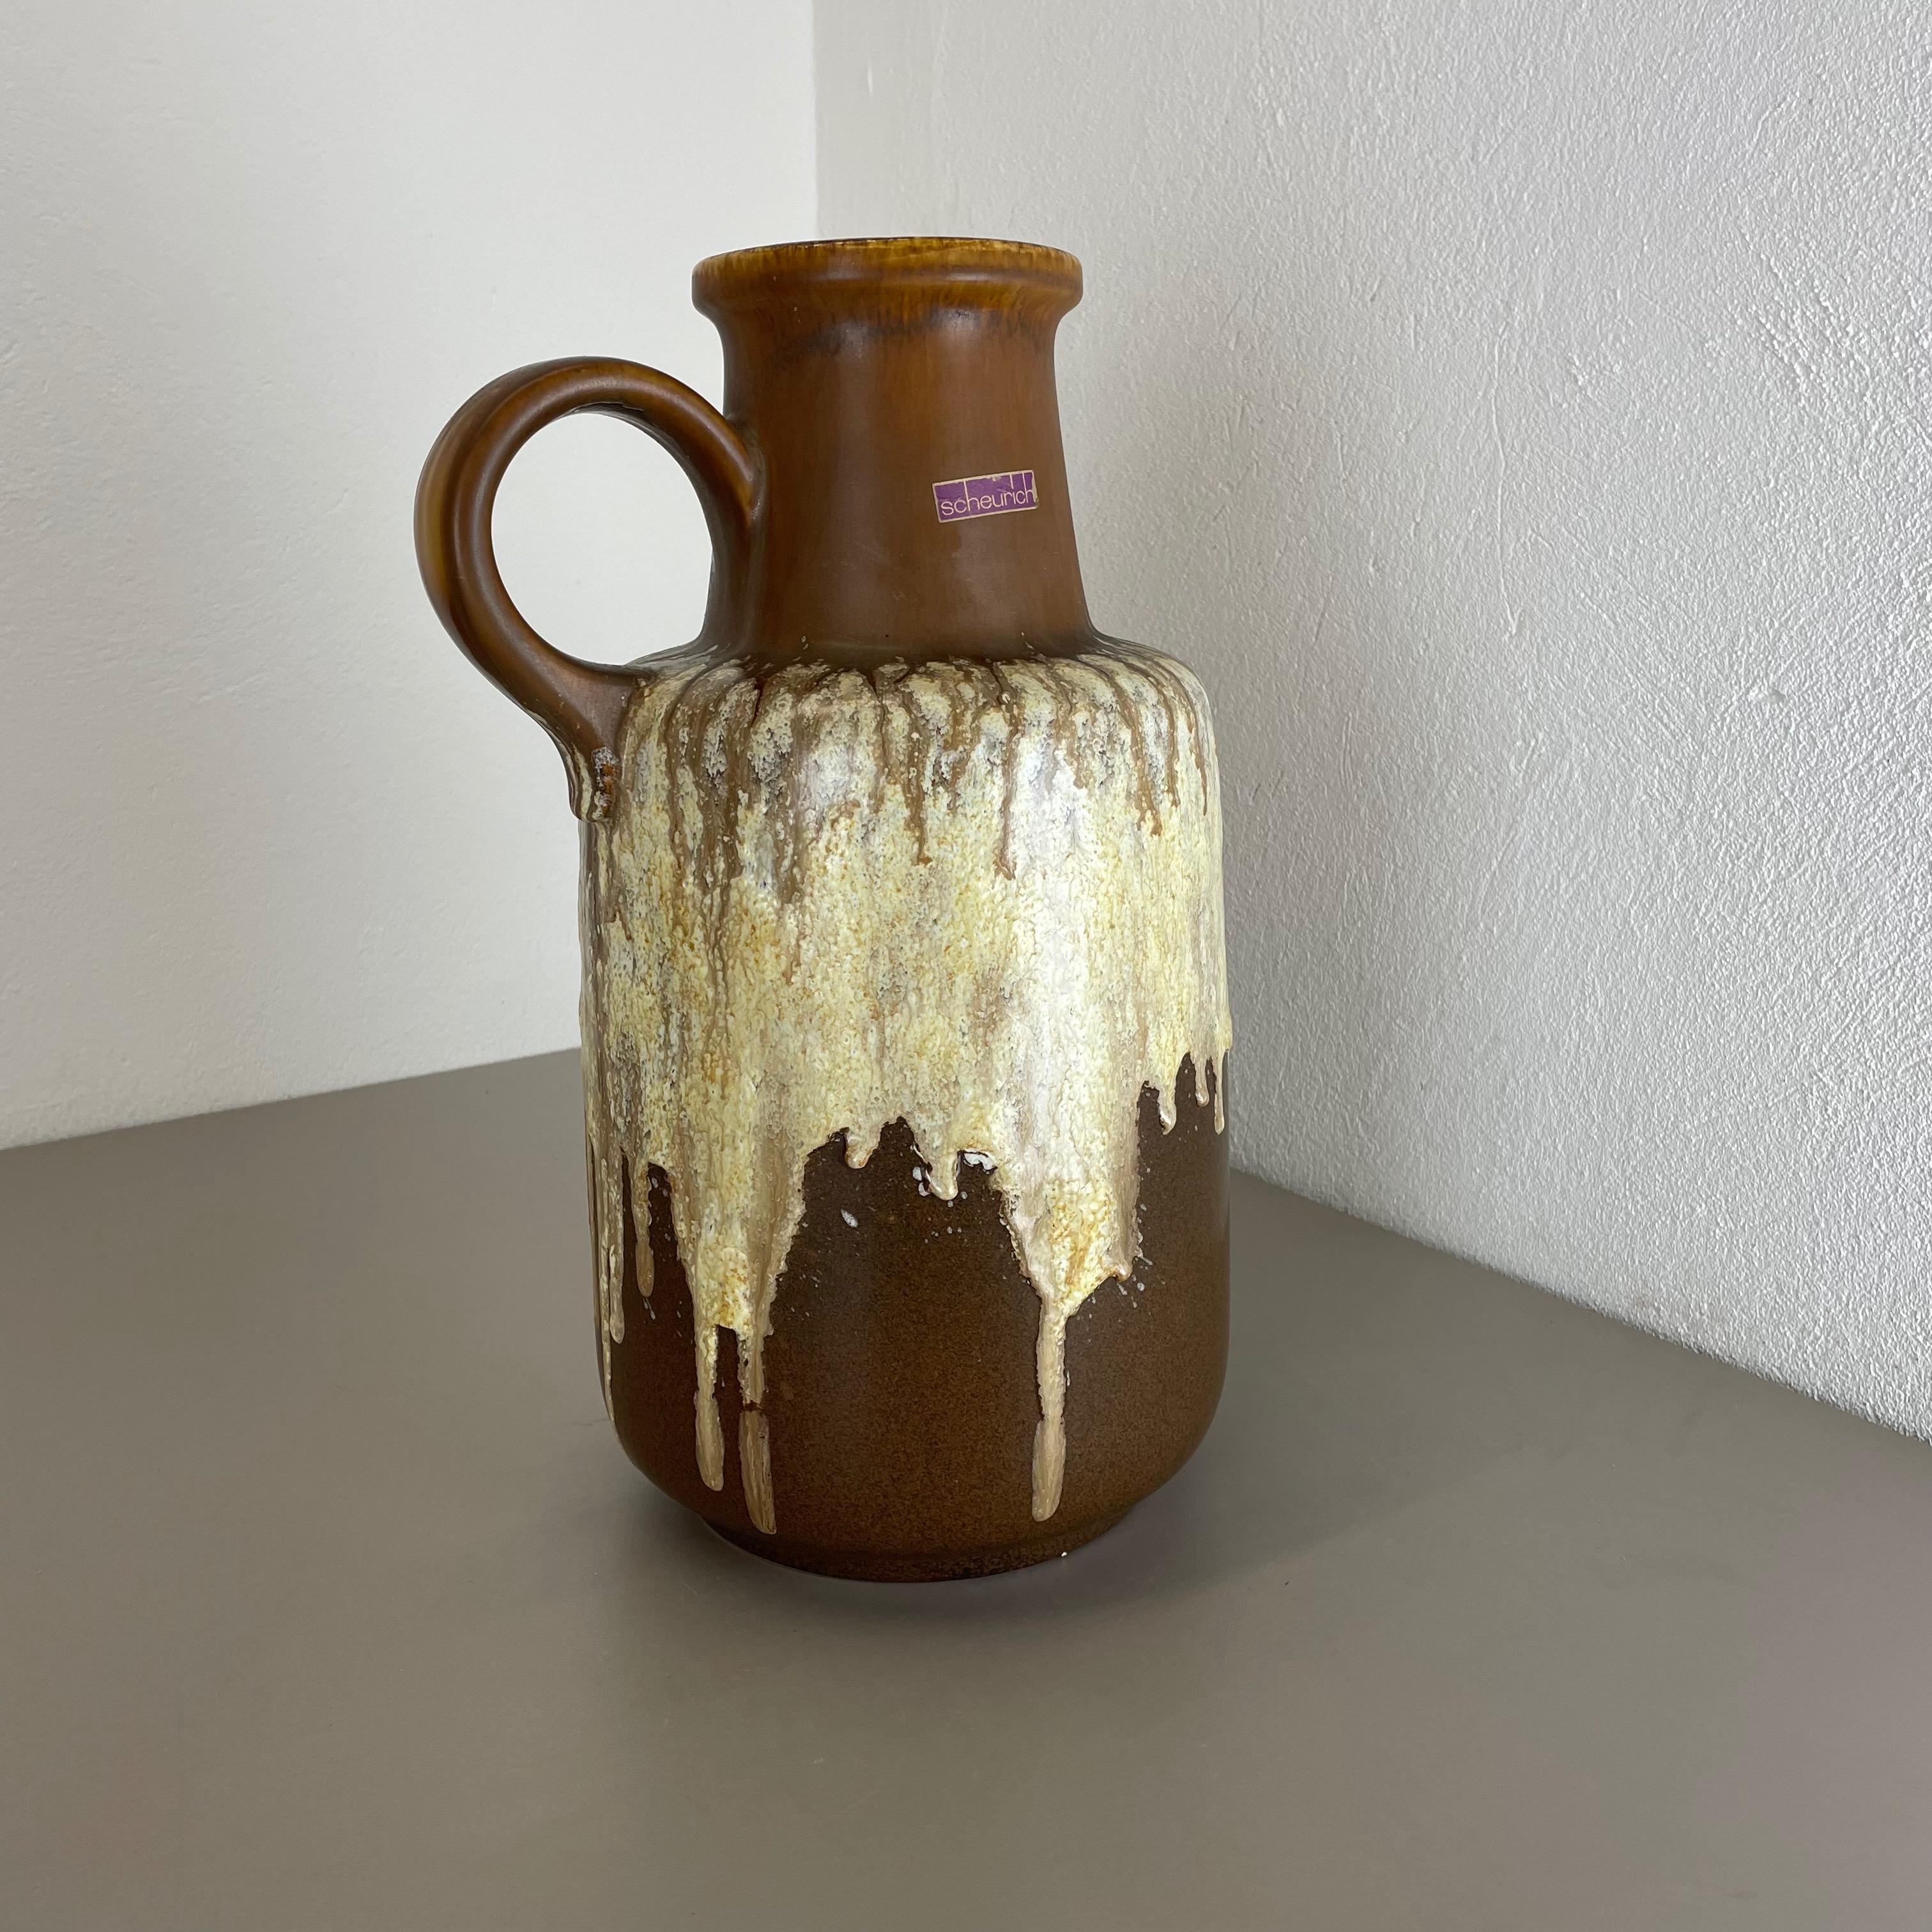 Article:

Fat lava art vase extra large version


Producer:

Scheurich, Germany



Decade:

1970s


Description:

This original vintage vase was produced in the 1970s in Germany. It is made of ceramic pottery in fat lava optic with